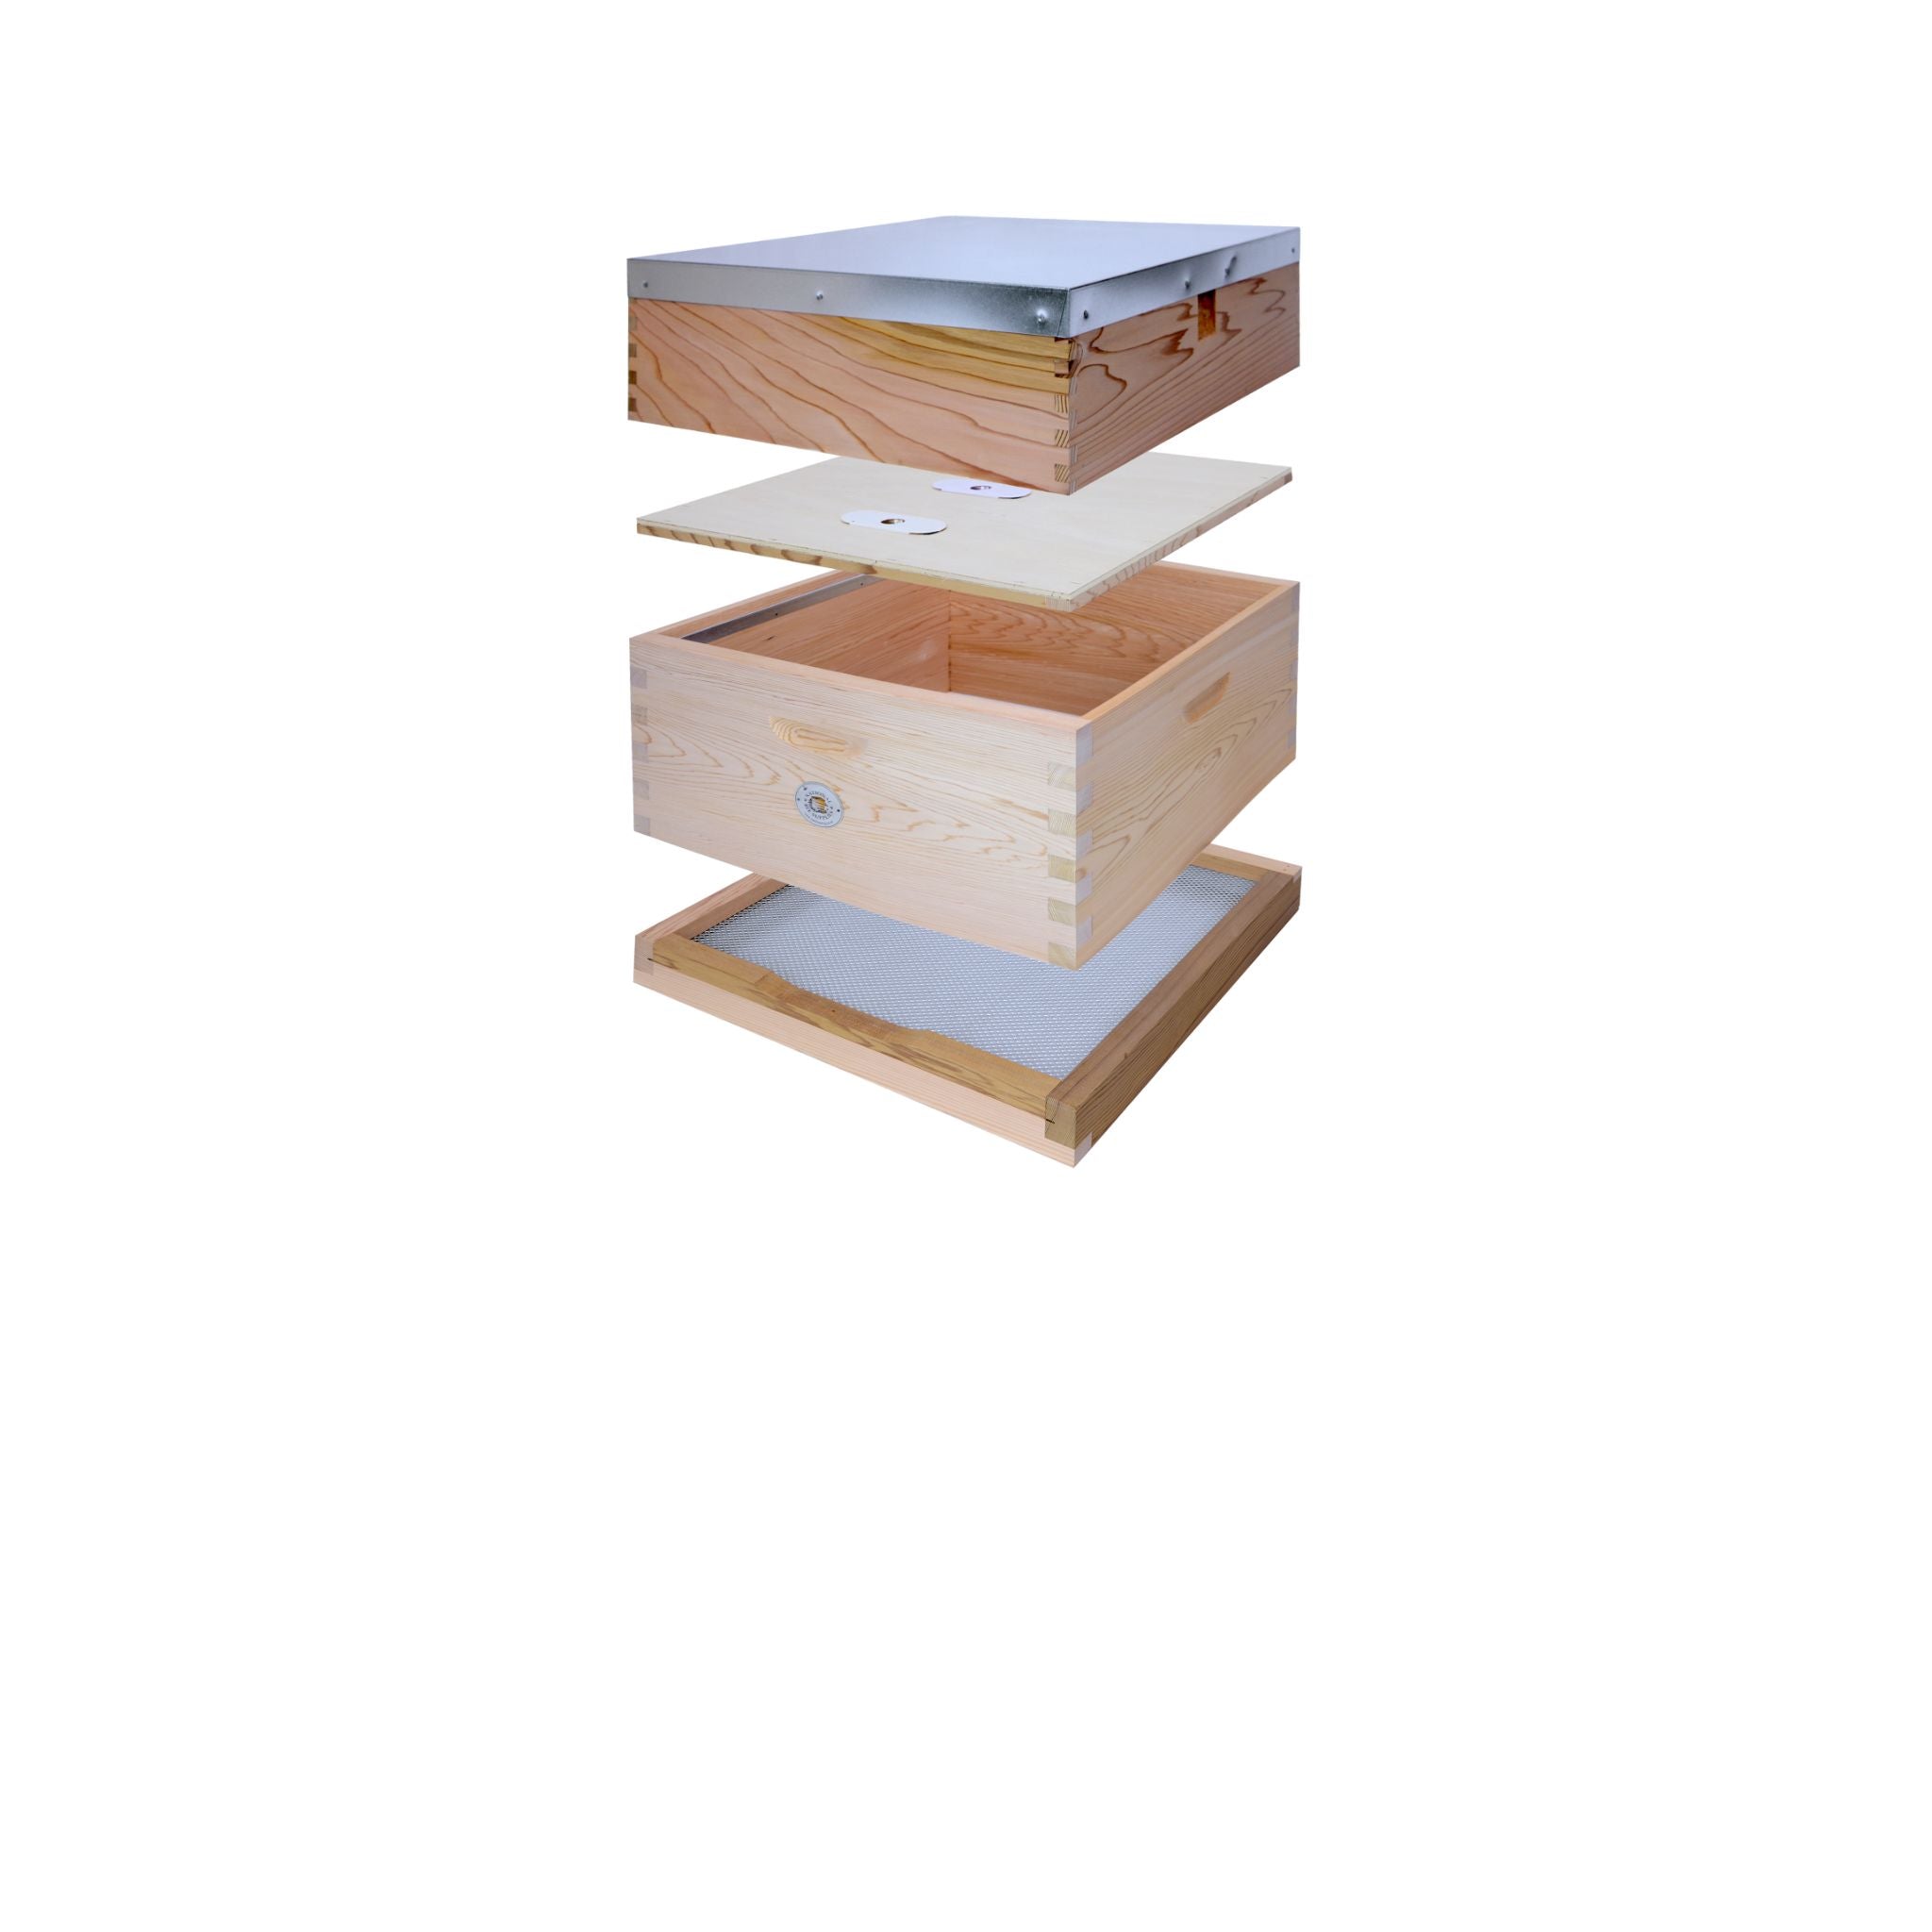 Commercial Hive Empty Kit